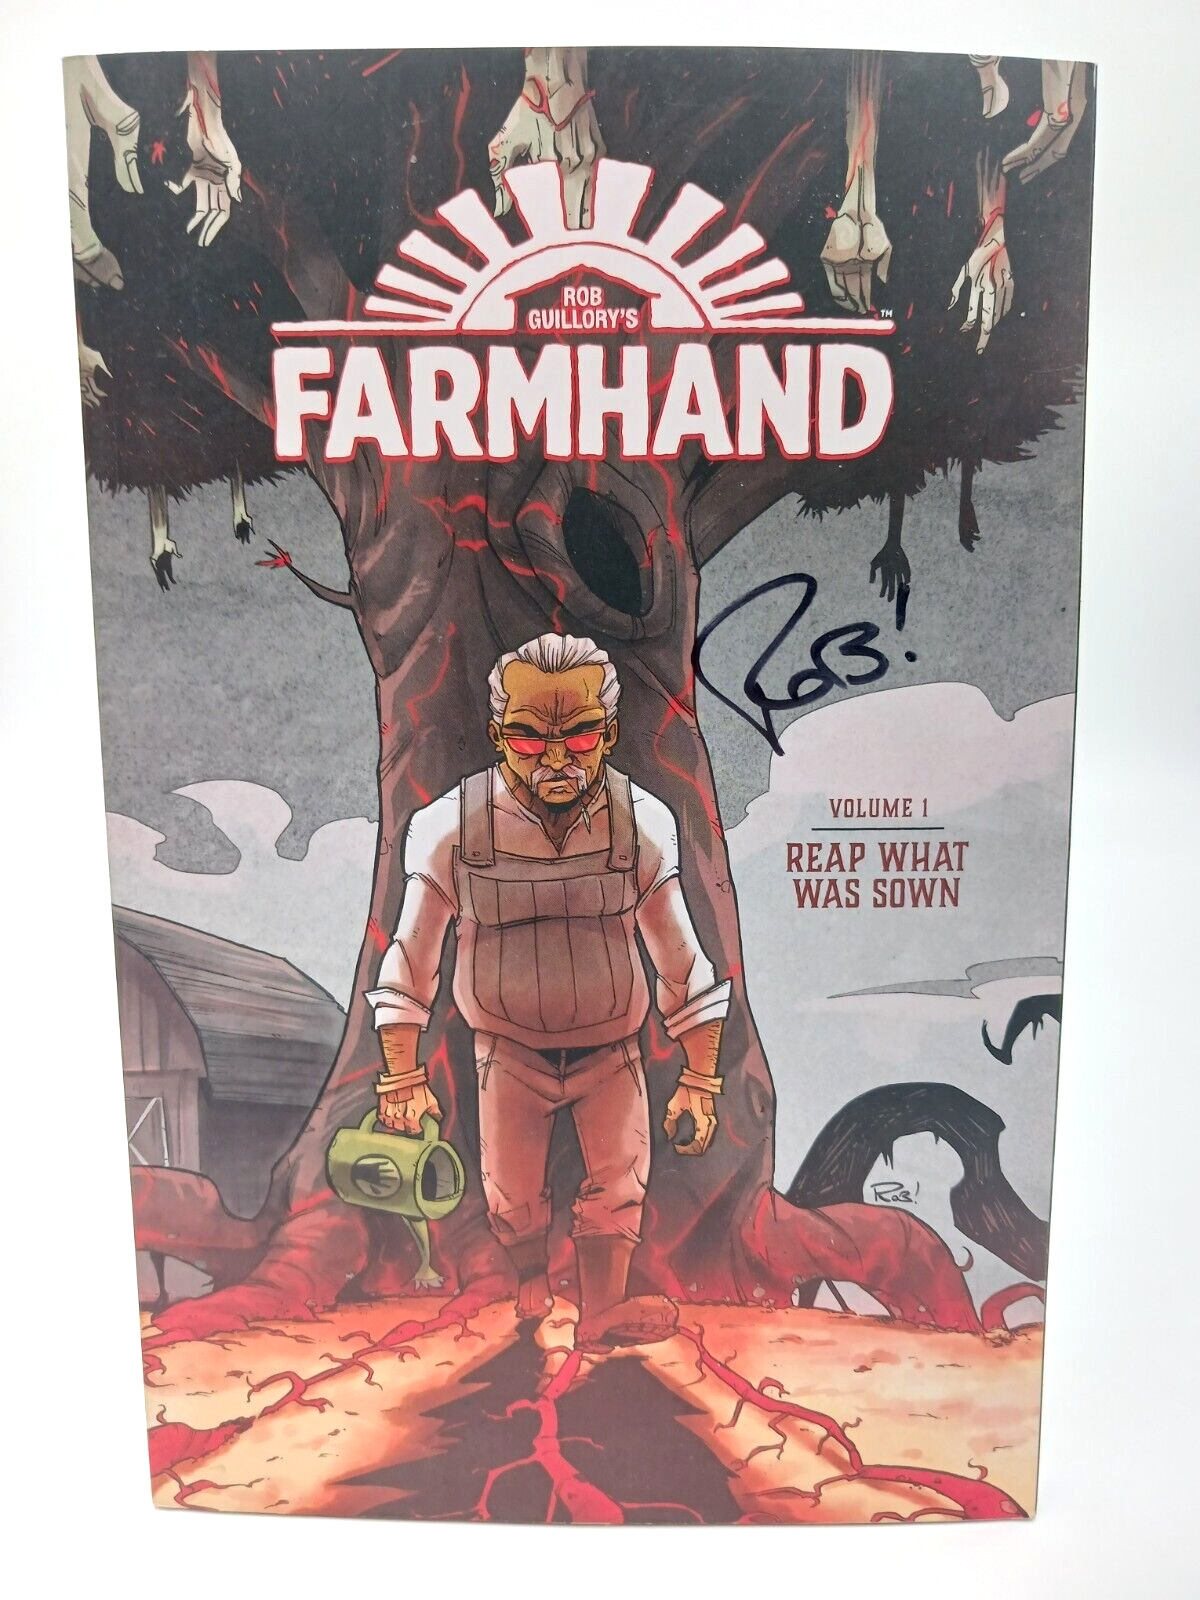 Farmhand Vol. 1 Reap What Was Sown Image Graphic Novel Autographed Rob Guillory